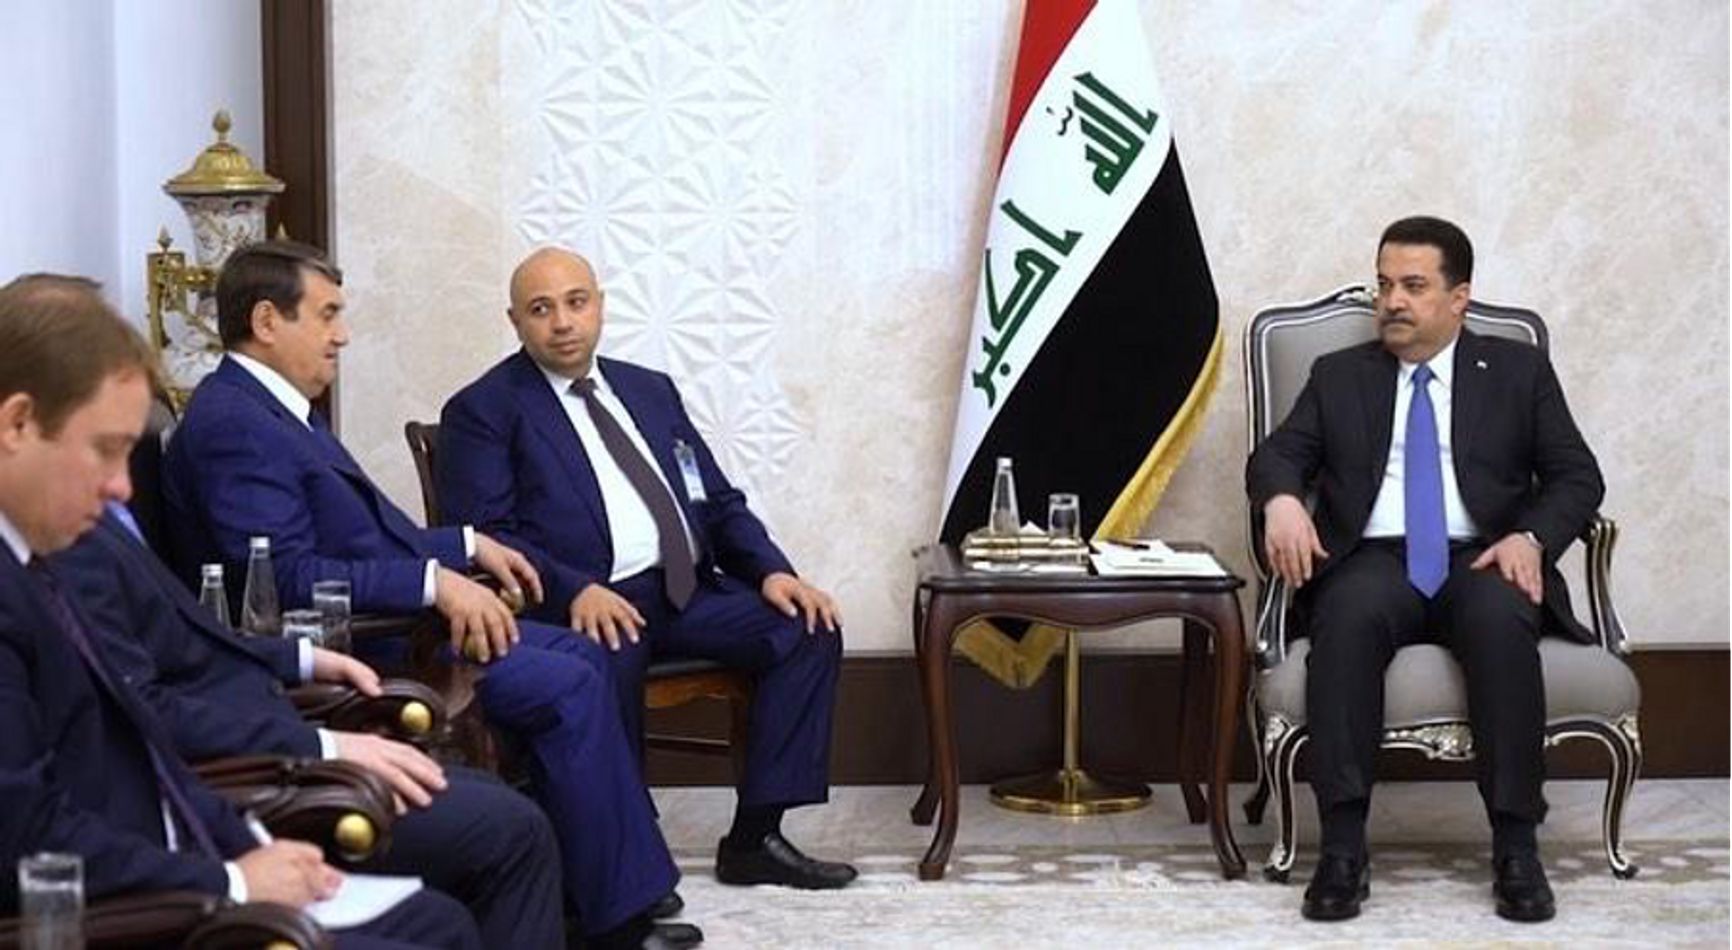 Kharchenko (far left) and the rest of the Russian delegation, including Levitin, meeting with the Iraqi Prime Minister Mohammed Shia' Al Sudani, November 2023.